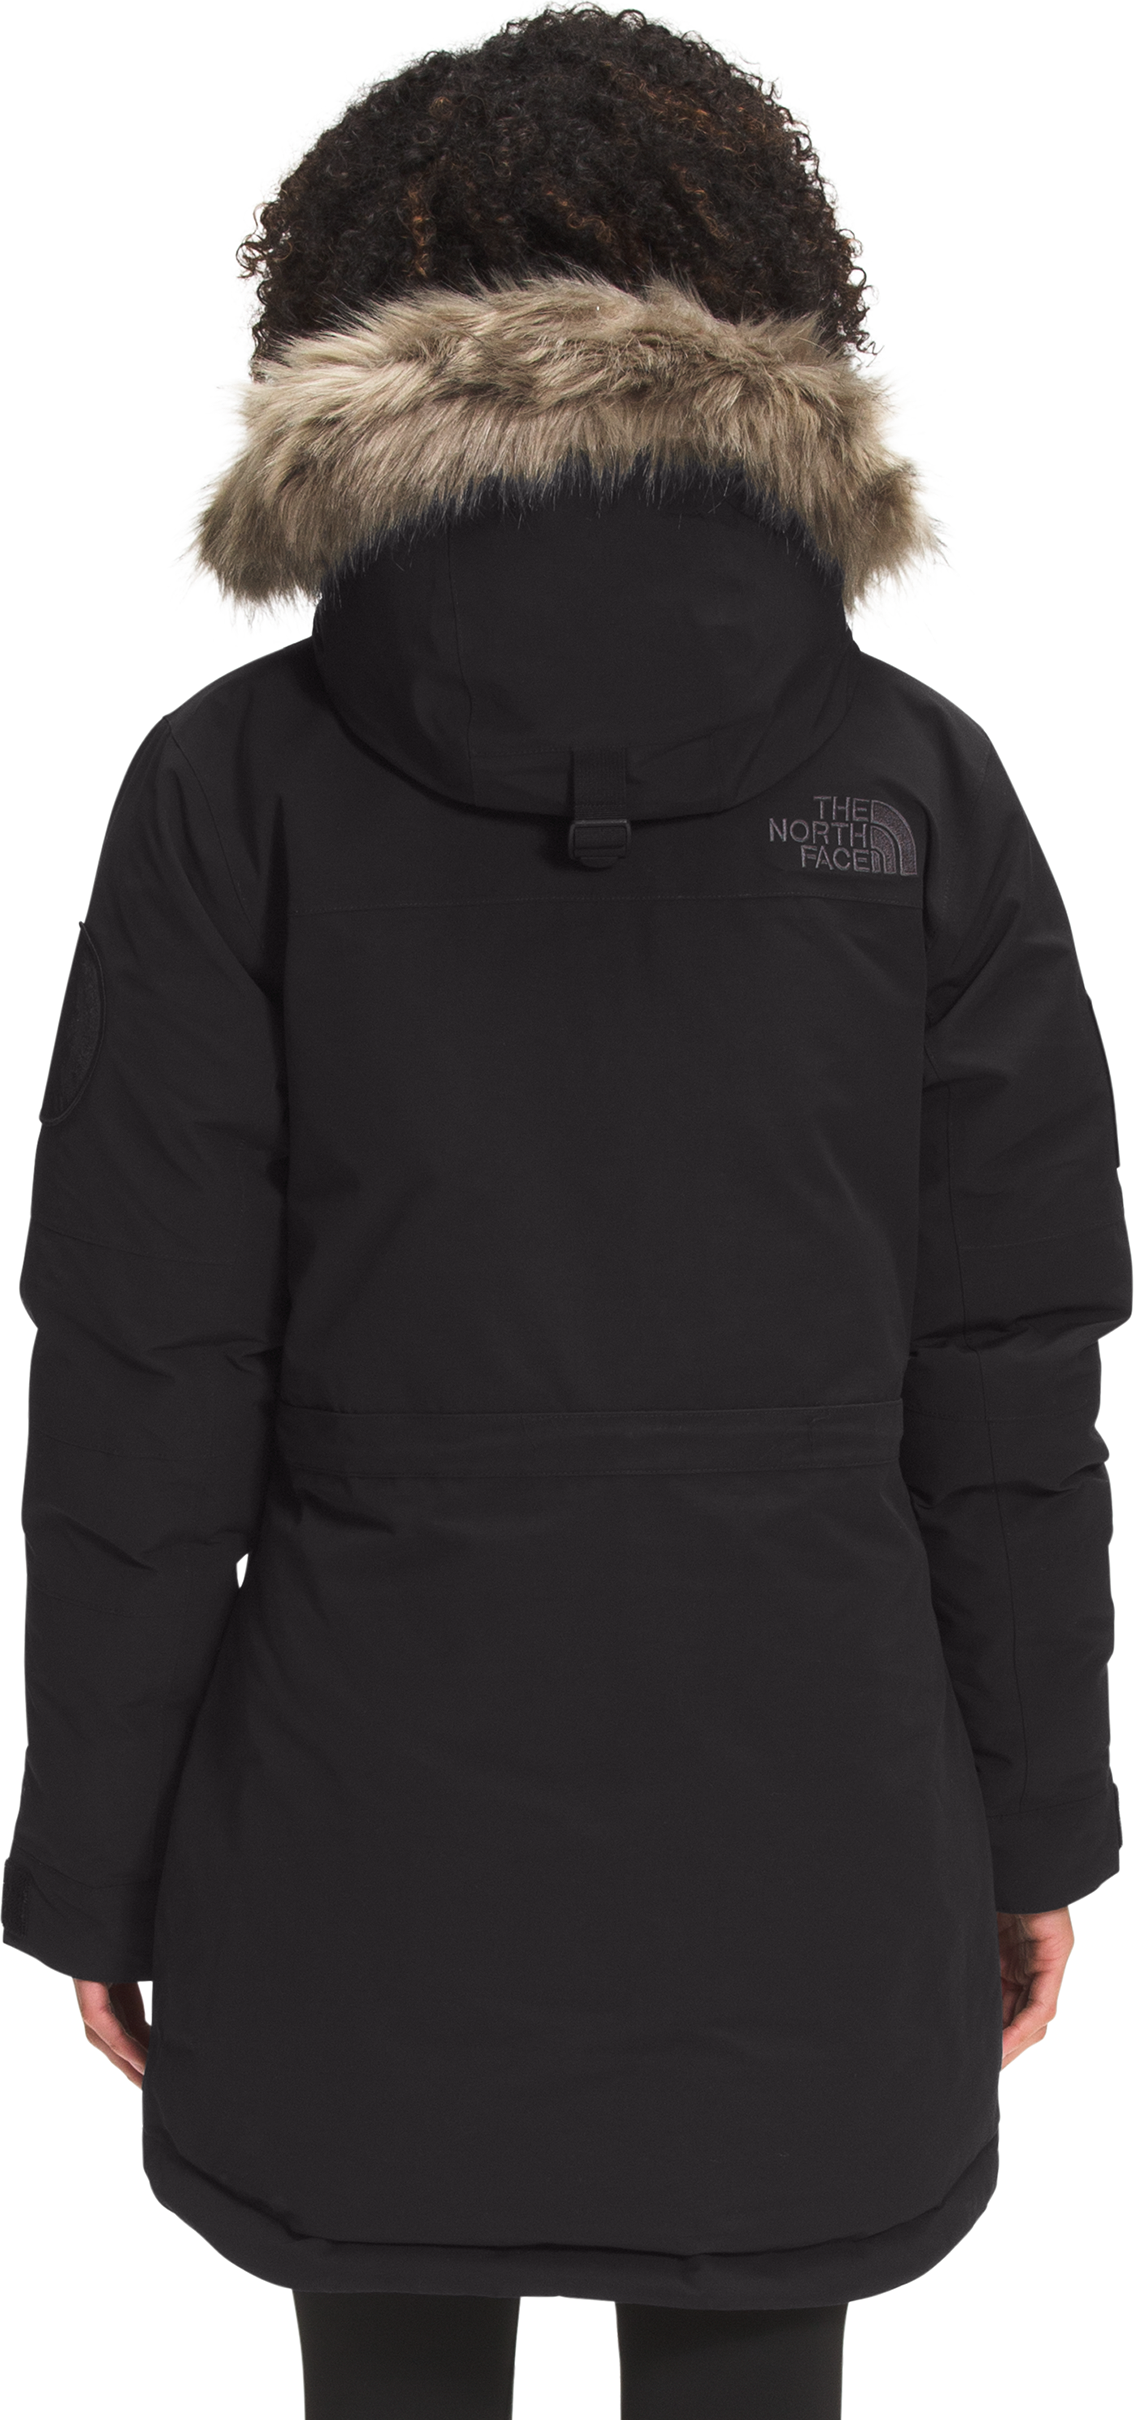 The North Face Apparel Women's Expedition Mcmurdo Parka Tnf Black